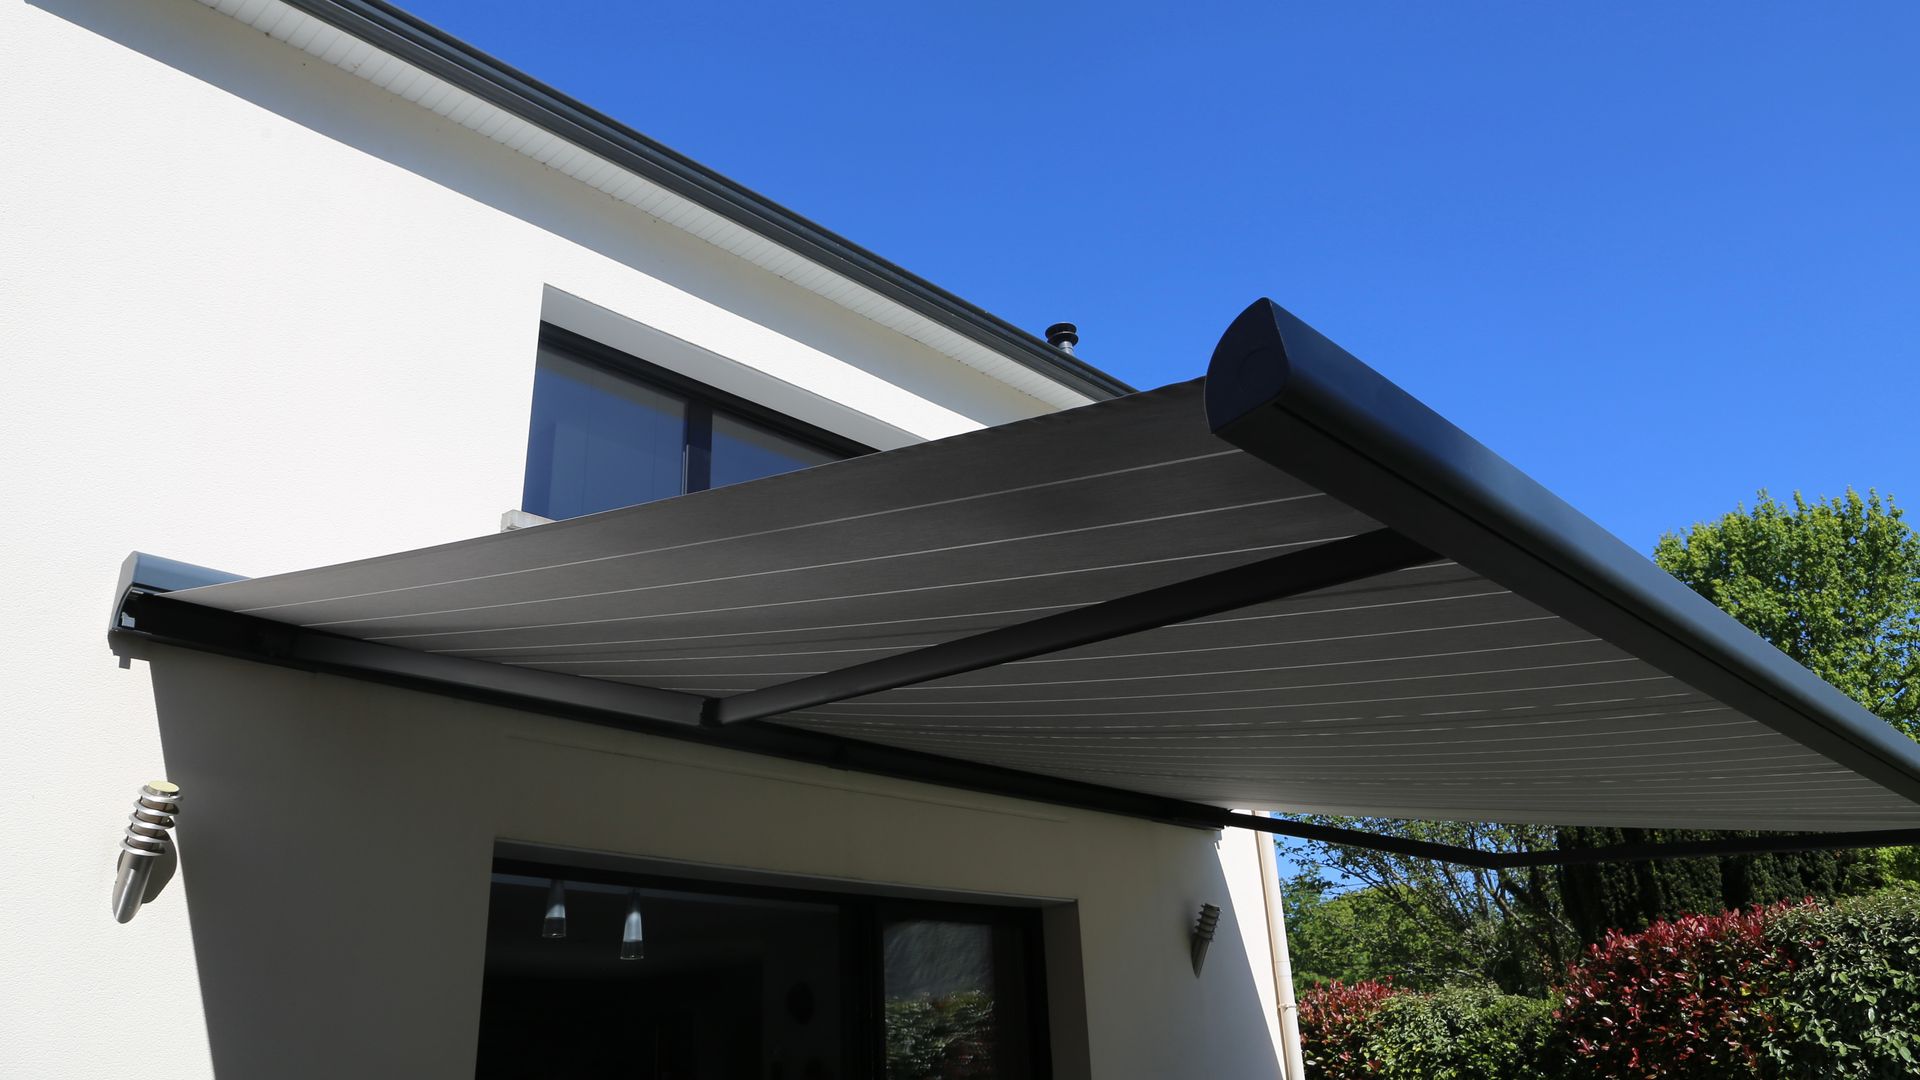 black and grey retractable awning on a white house